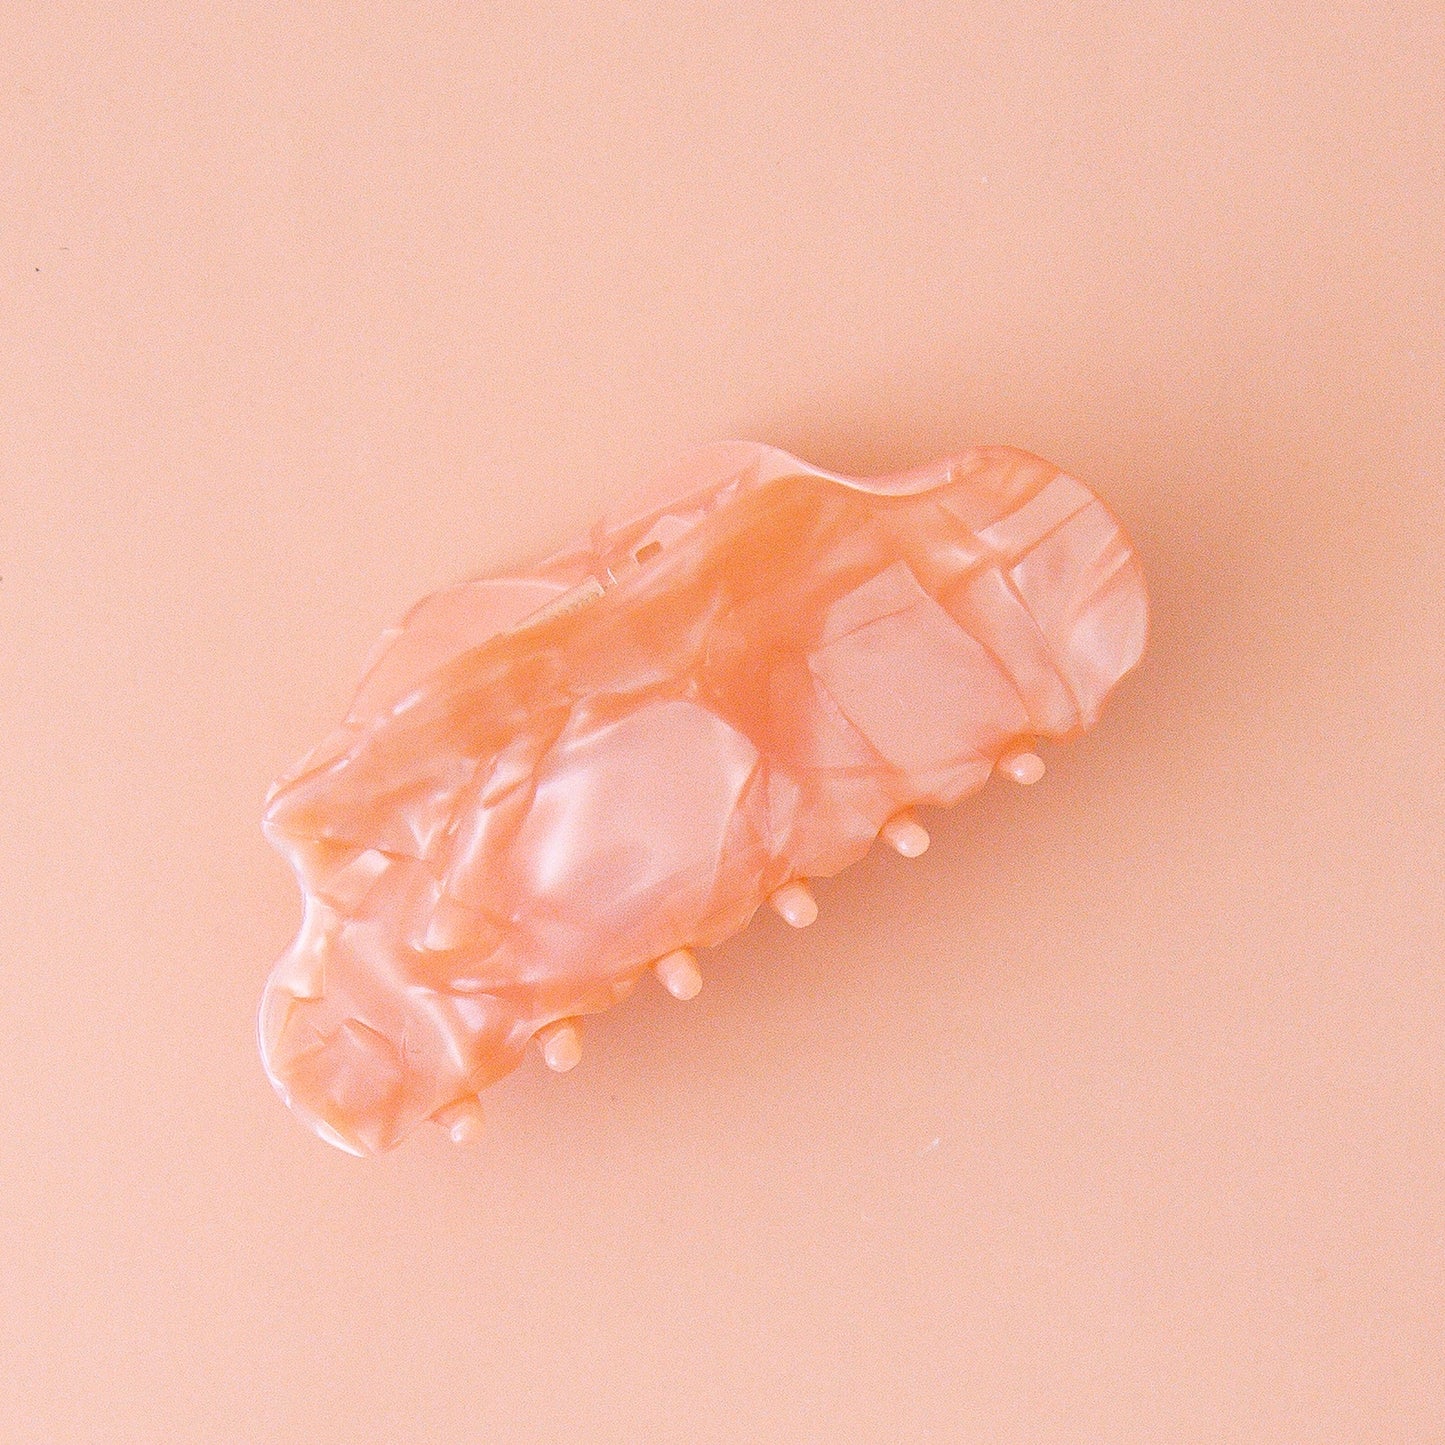 On a light pink background is the venus hair claw clip in the shade peach shell which is a peachy pink color with a shiny marbled finish.